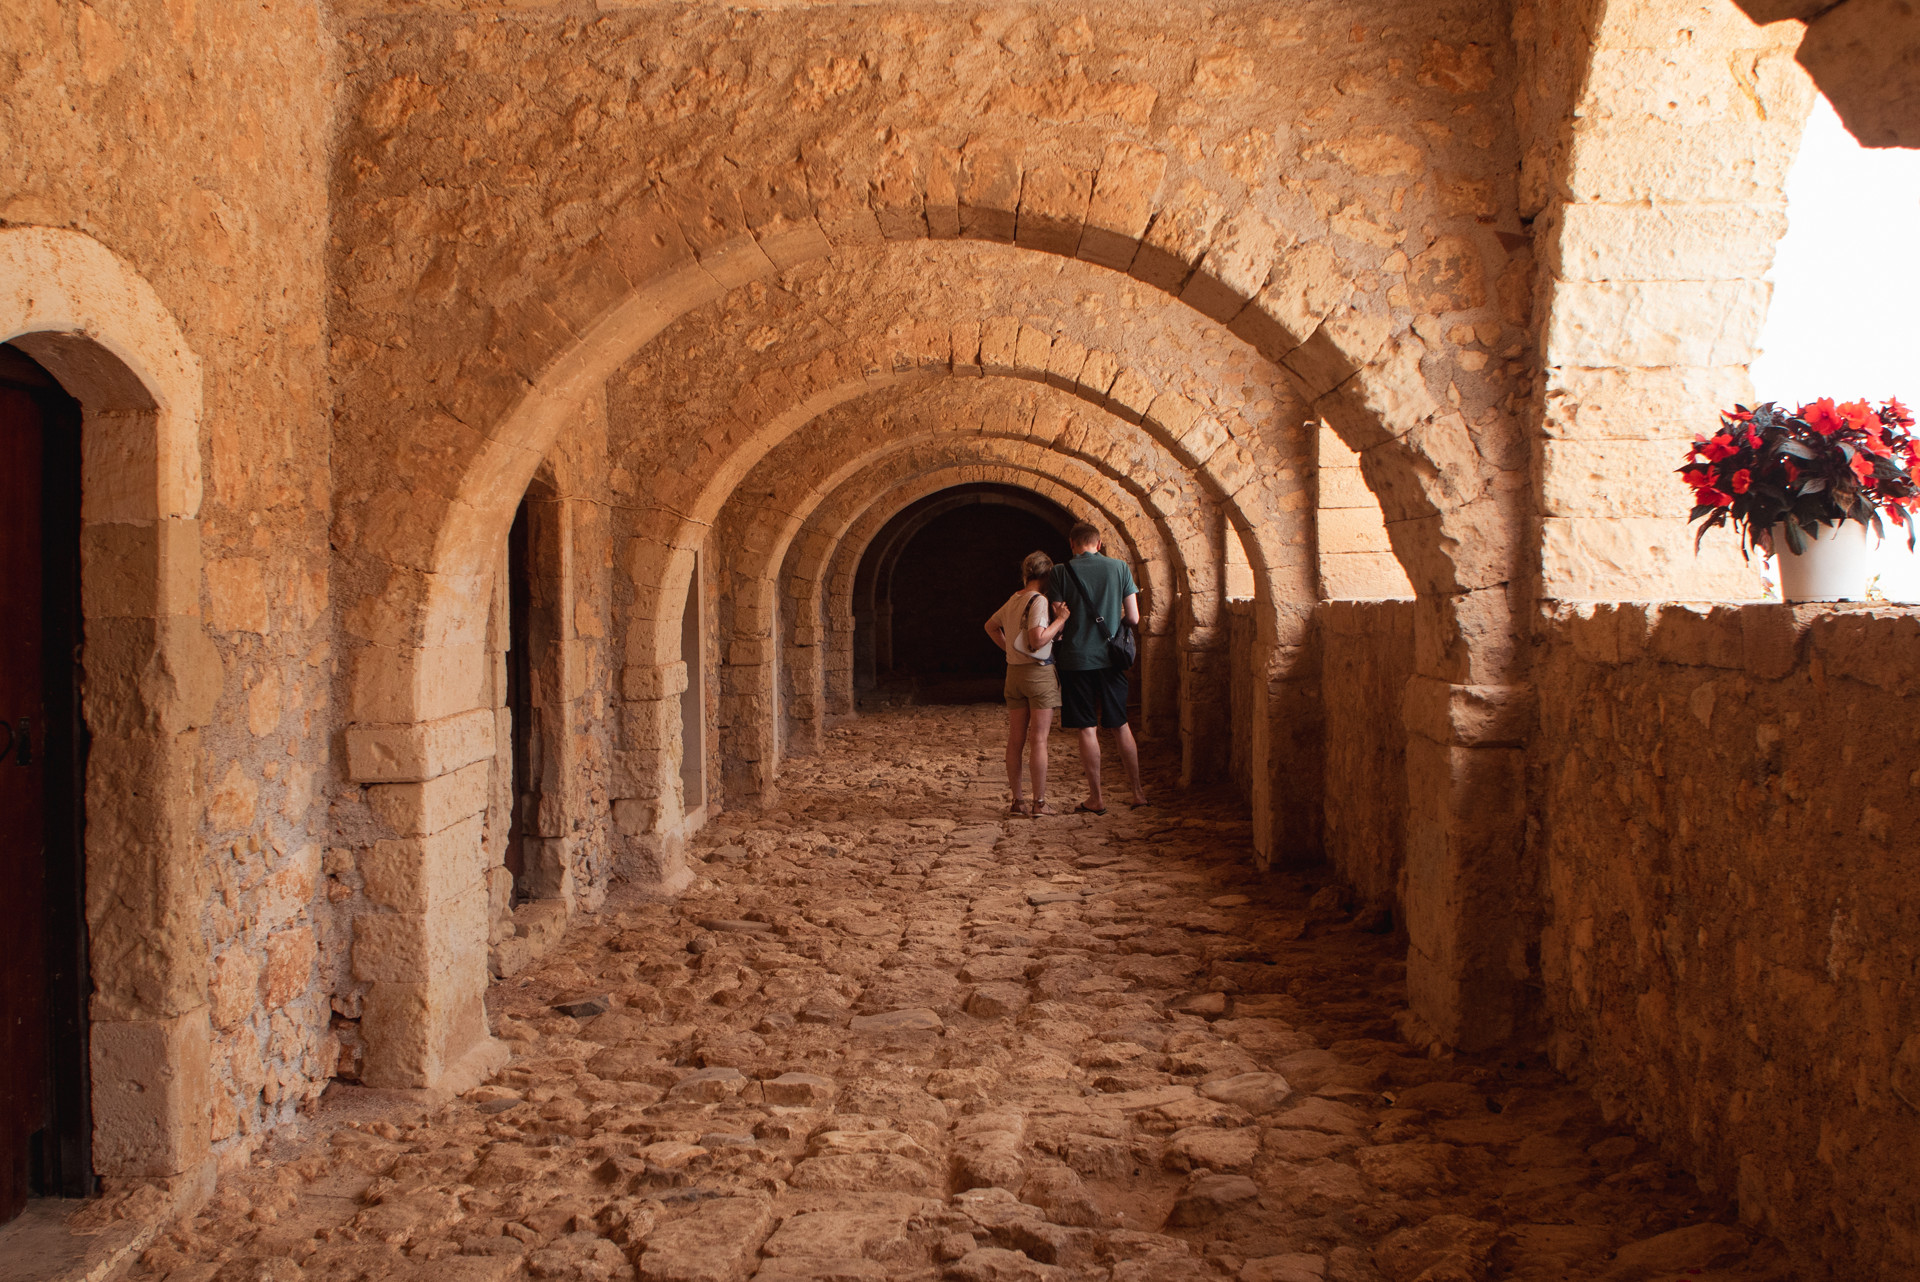 Prayer rooms and monks’ cells are found around the Arkadi Monastery